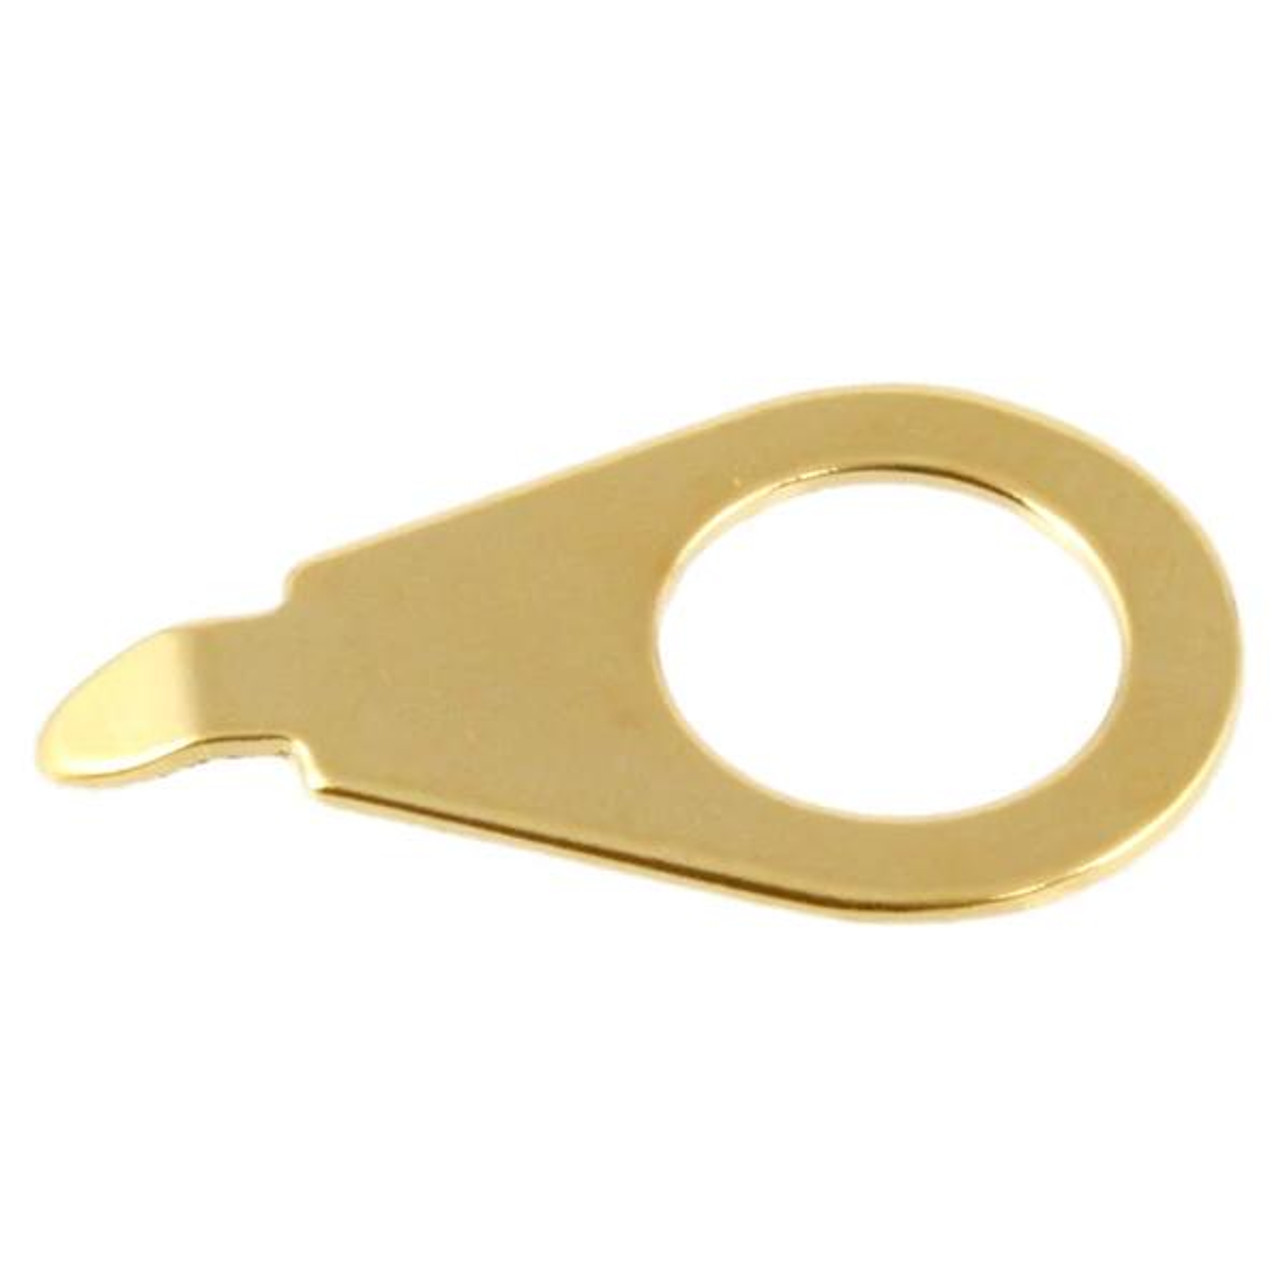 Pointer washers, vintage style 90 degree bend, sharp point (8 pcs.), Gold